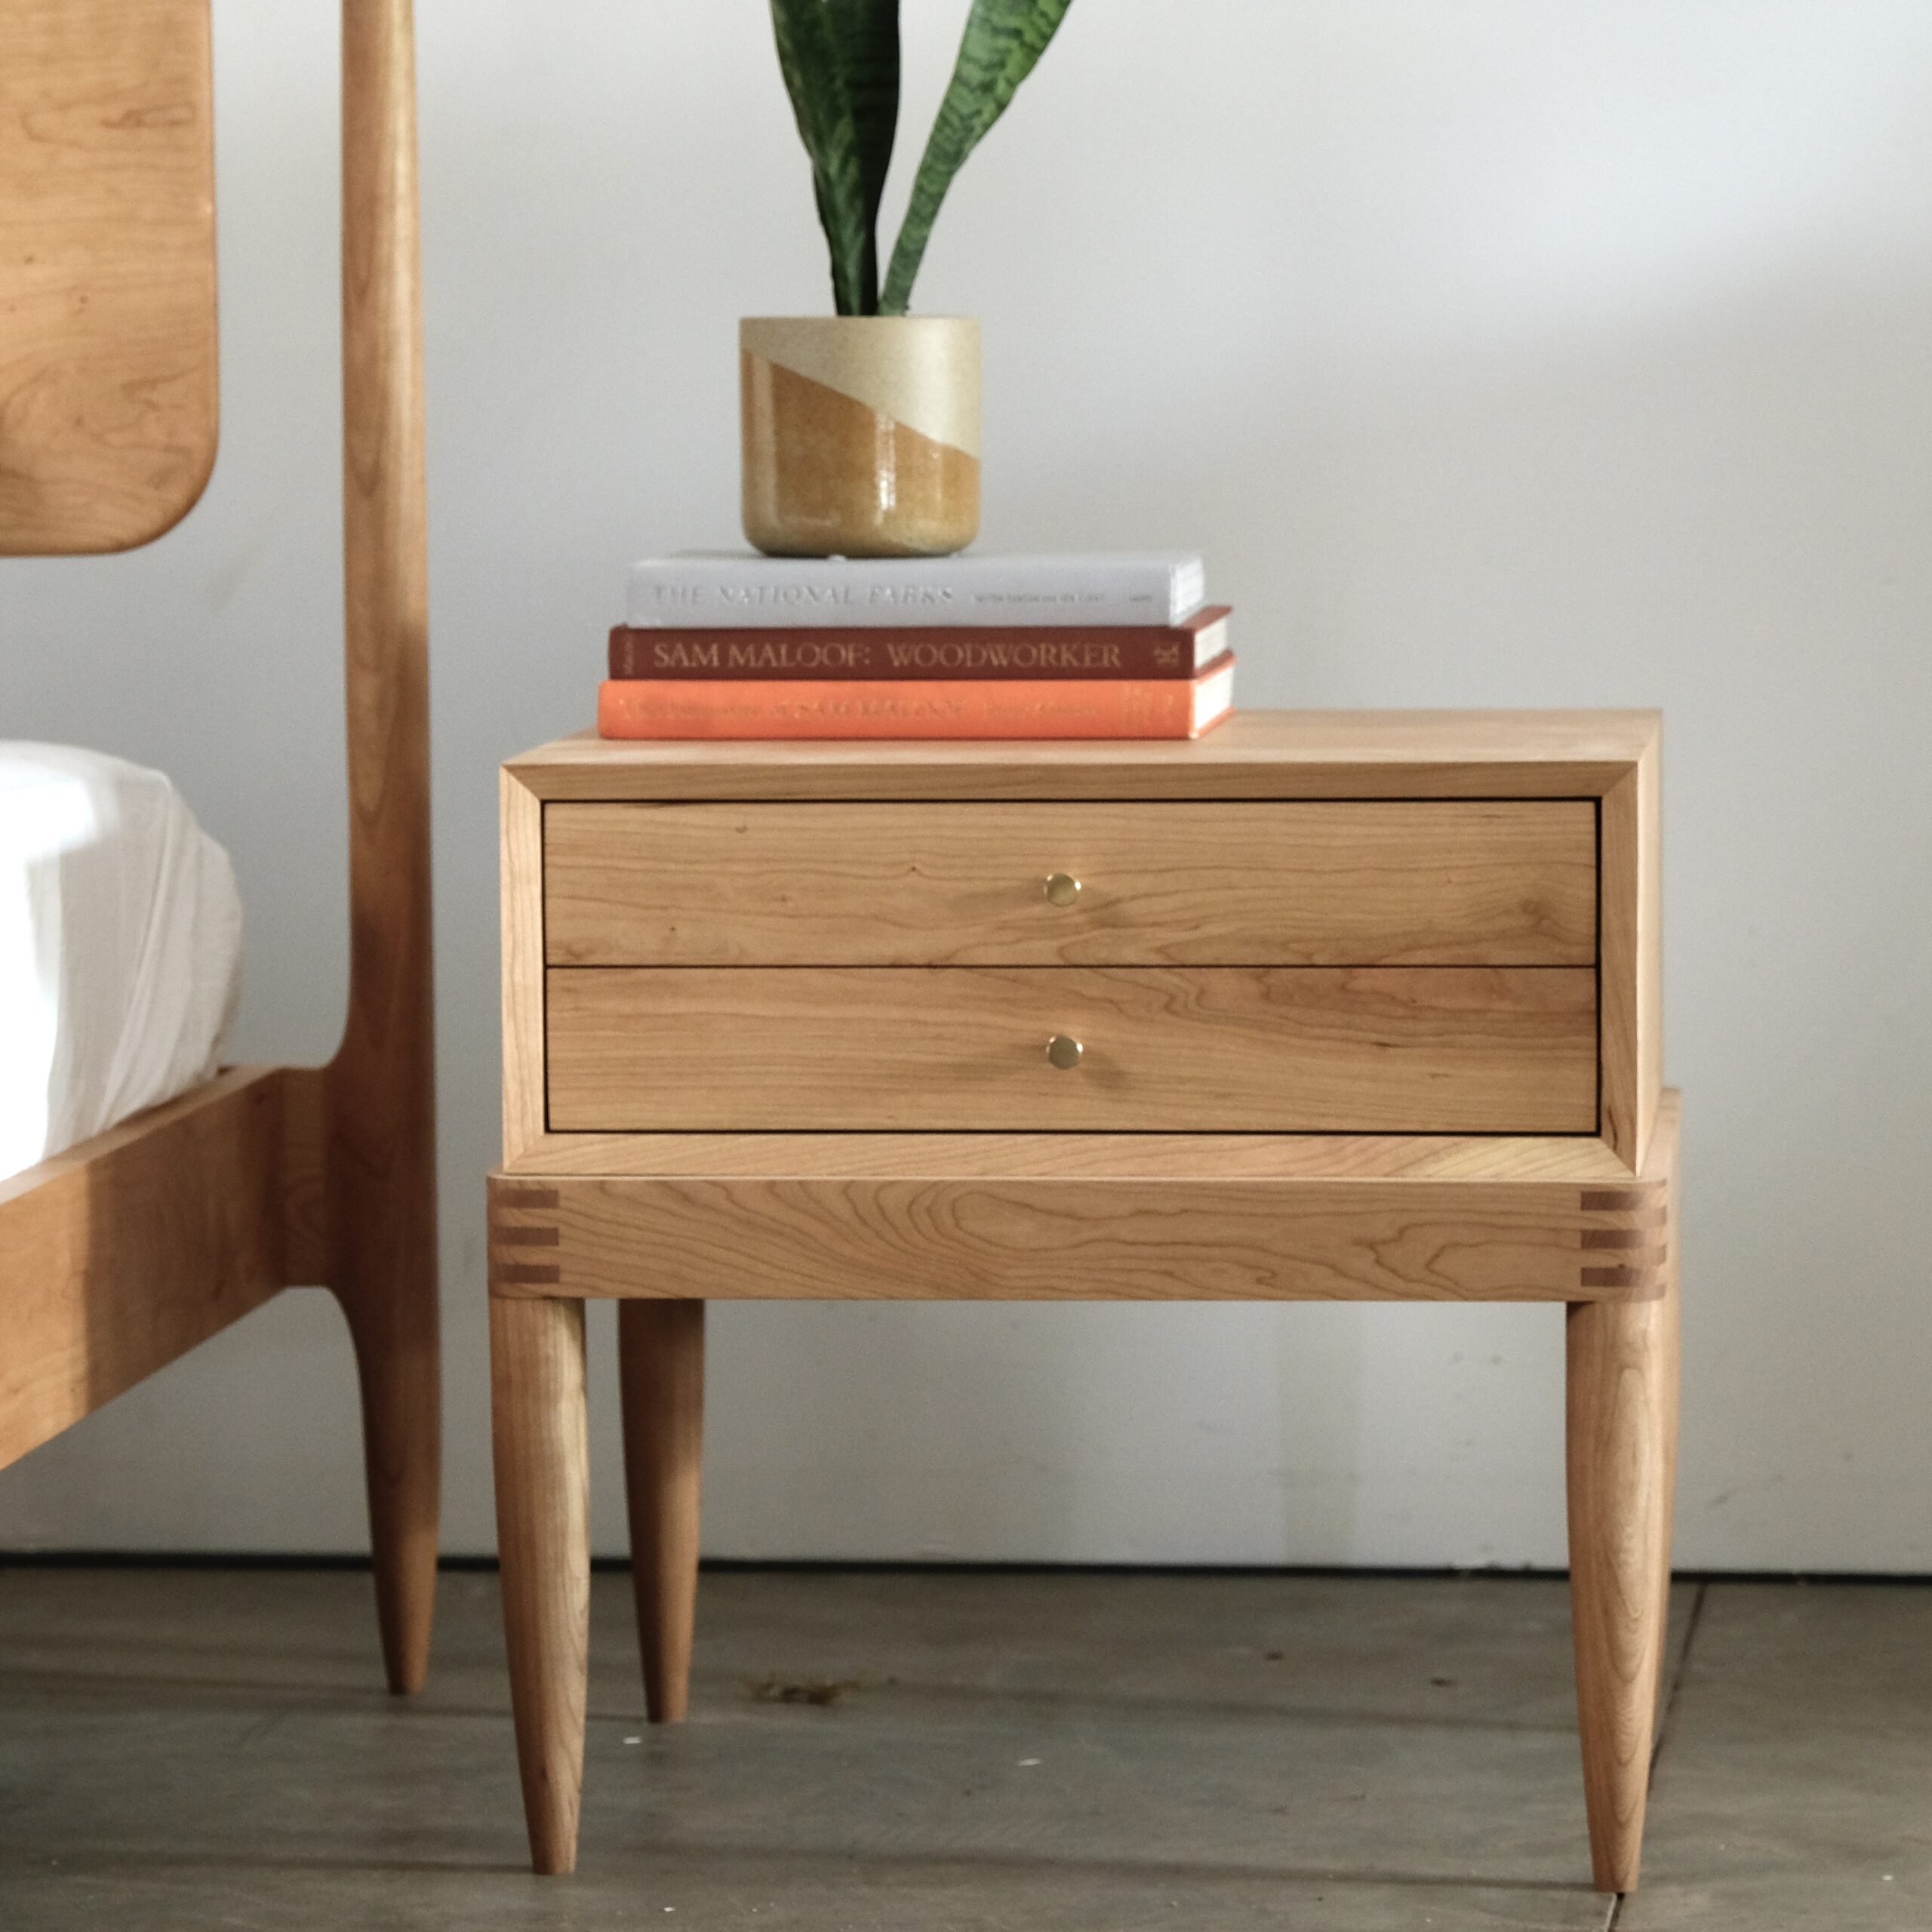 A simple two-drawer solid cherry nightstand with exposed joiner at the base and conical brass pulls.